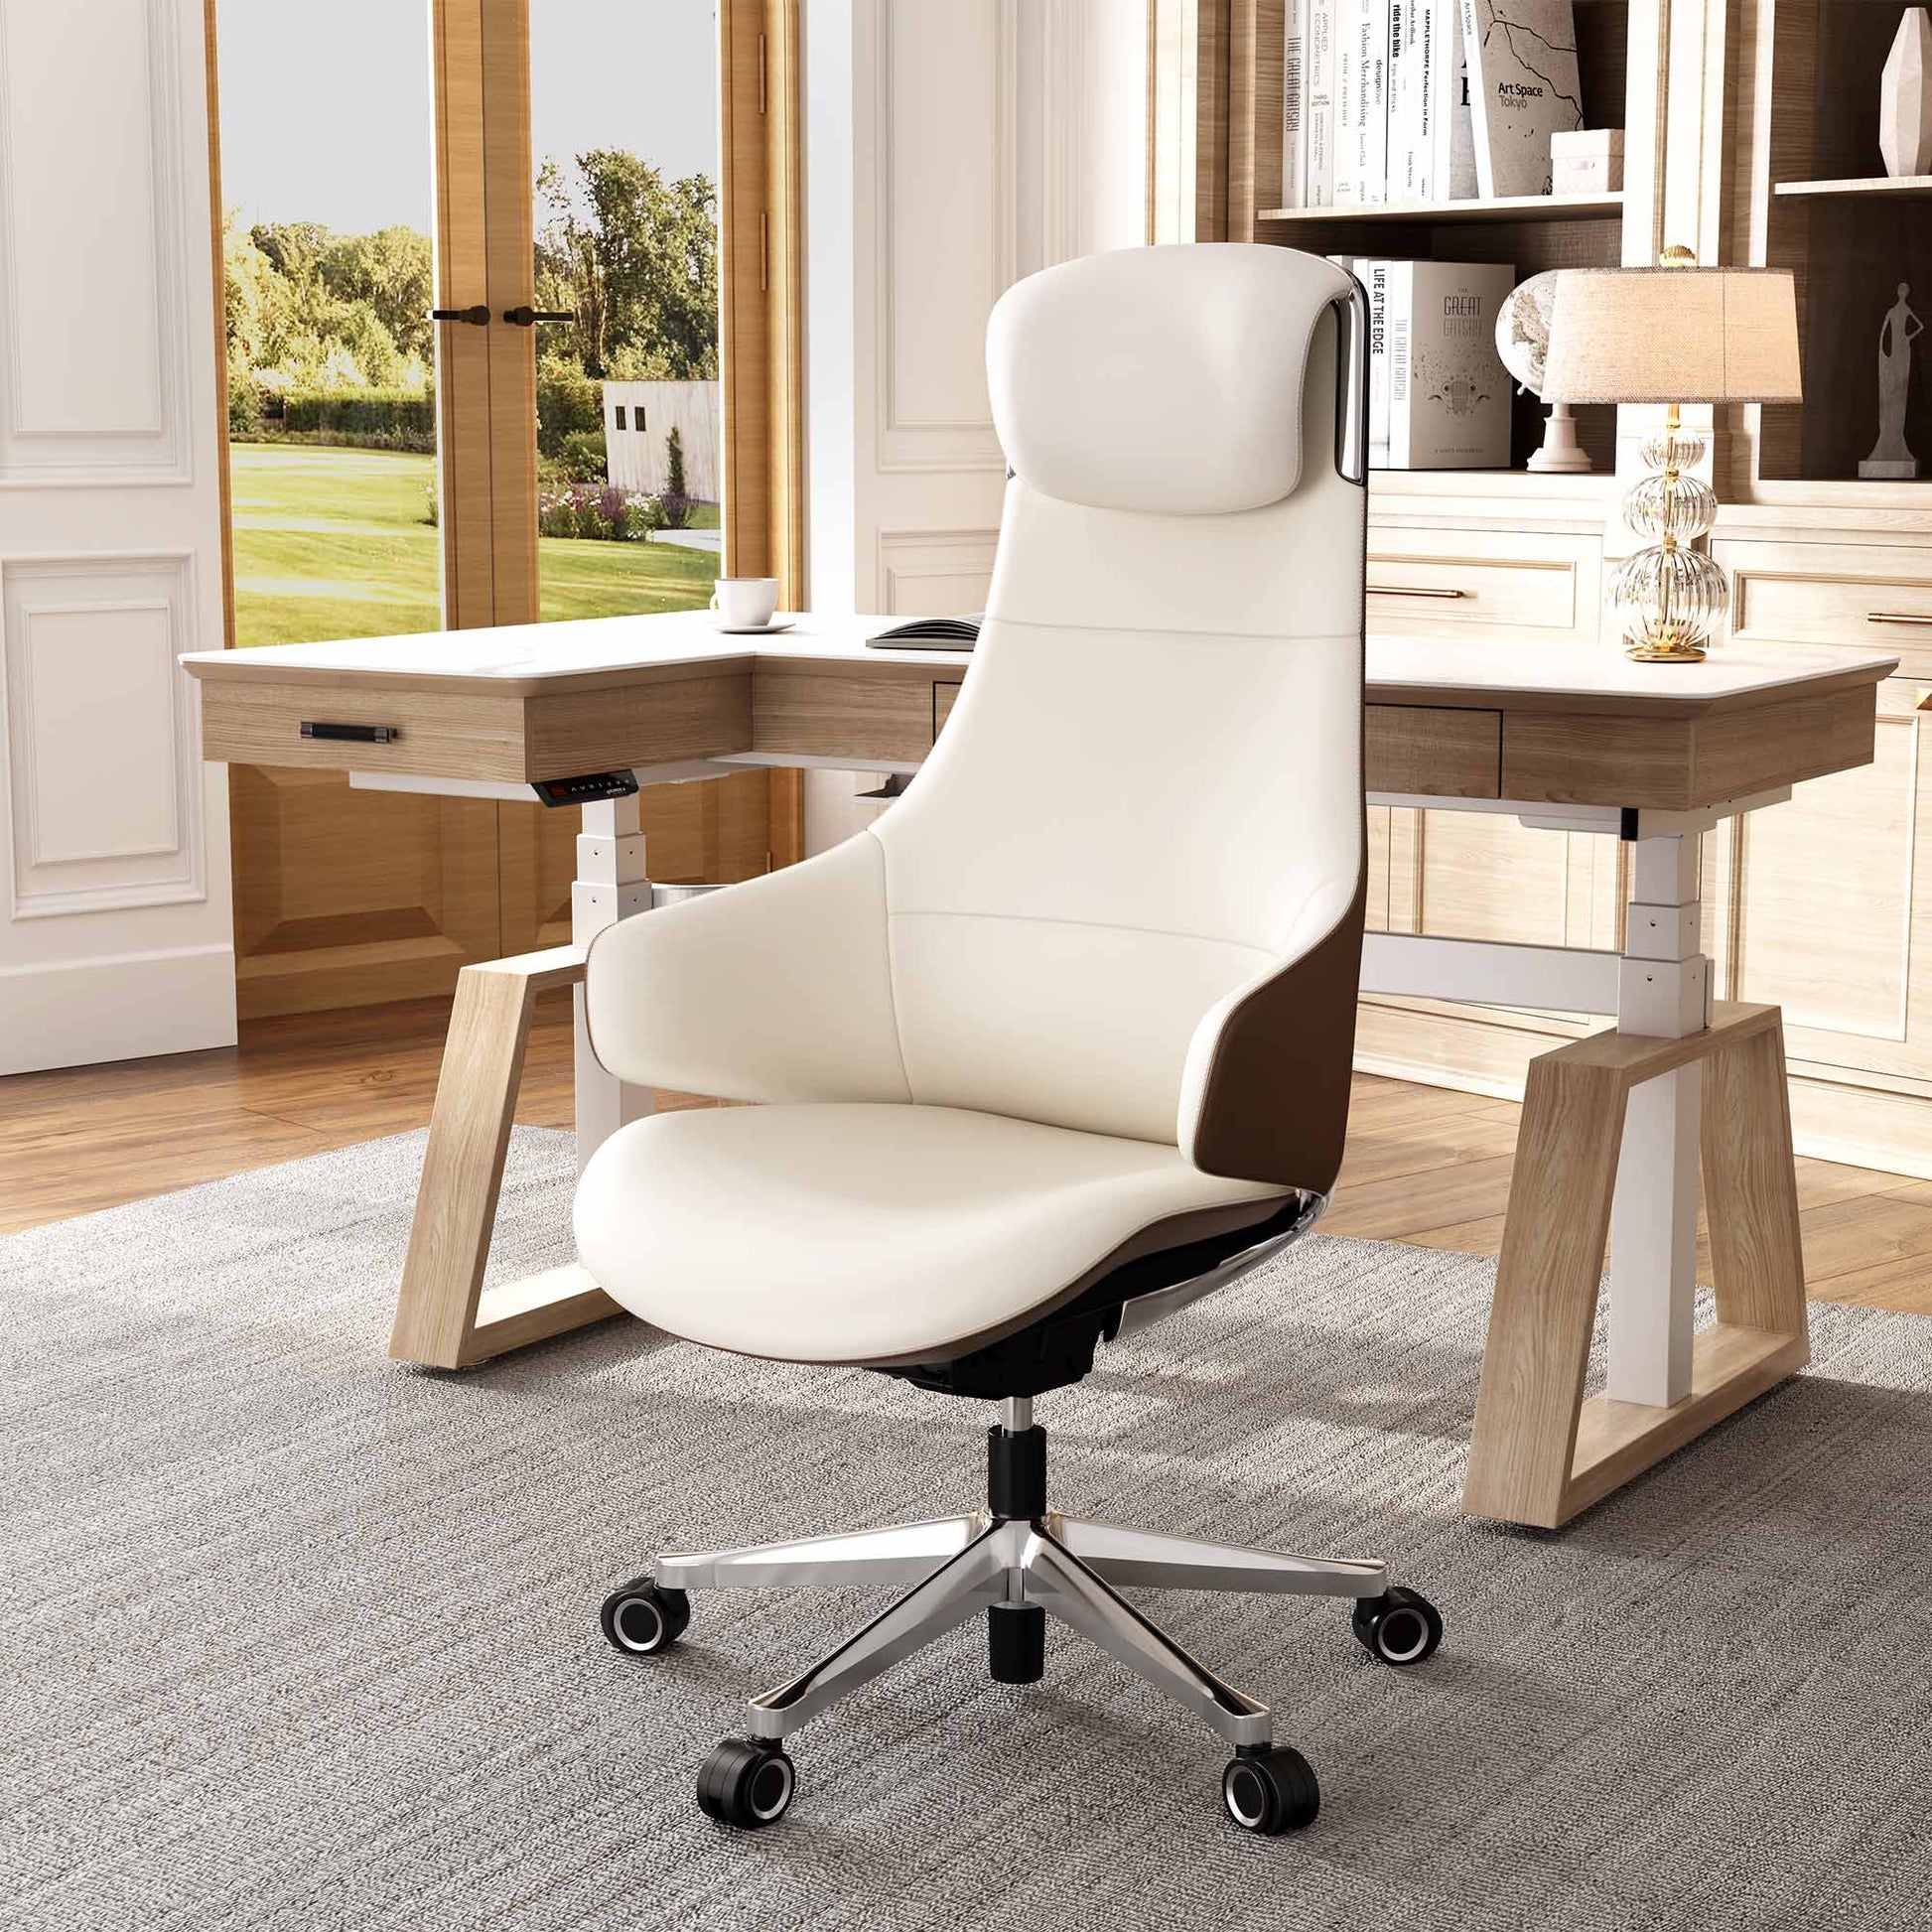 executive office chair,Eureka Ergonomic Modern High End-Luxury Genuine Leather Office Chair,Off-White